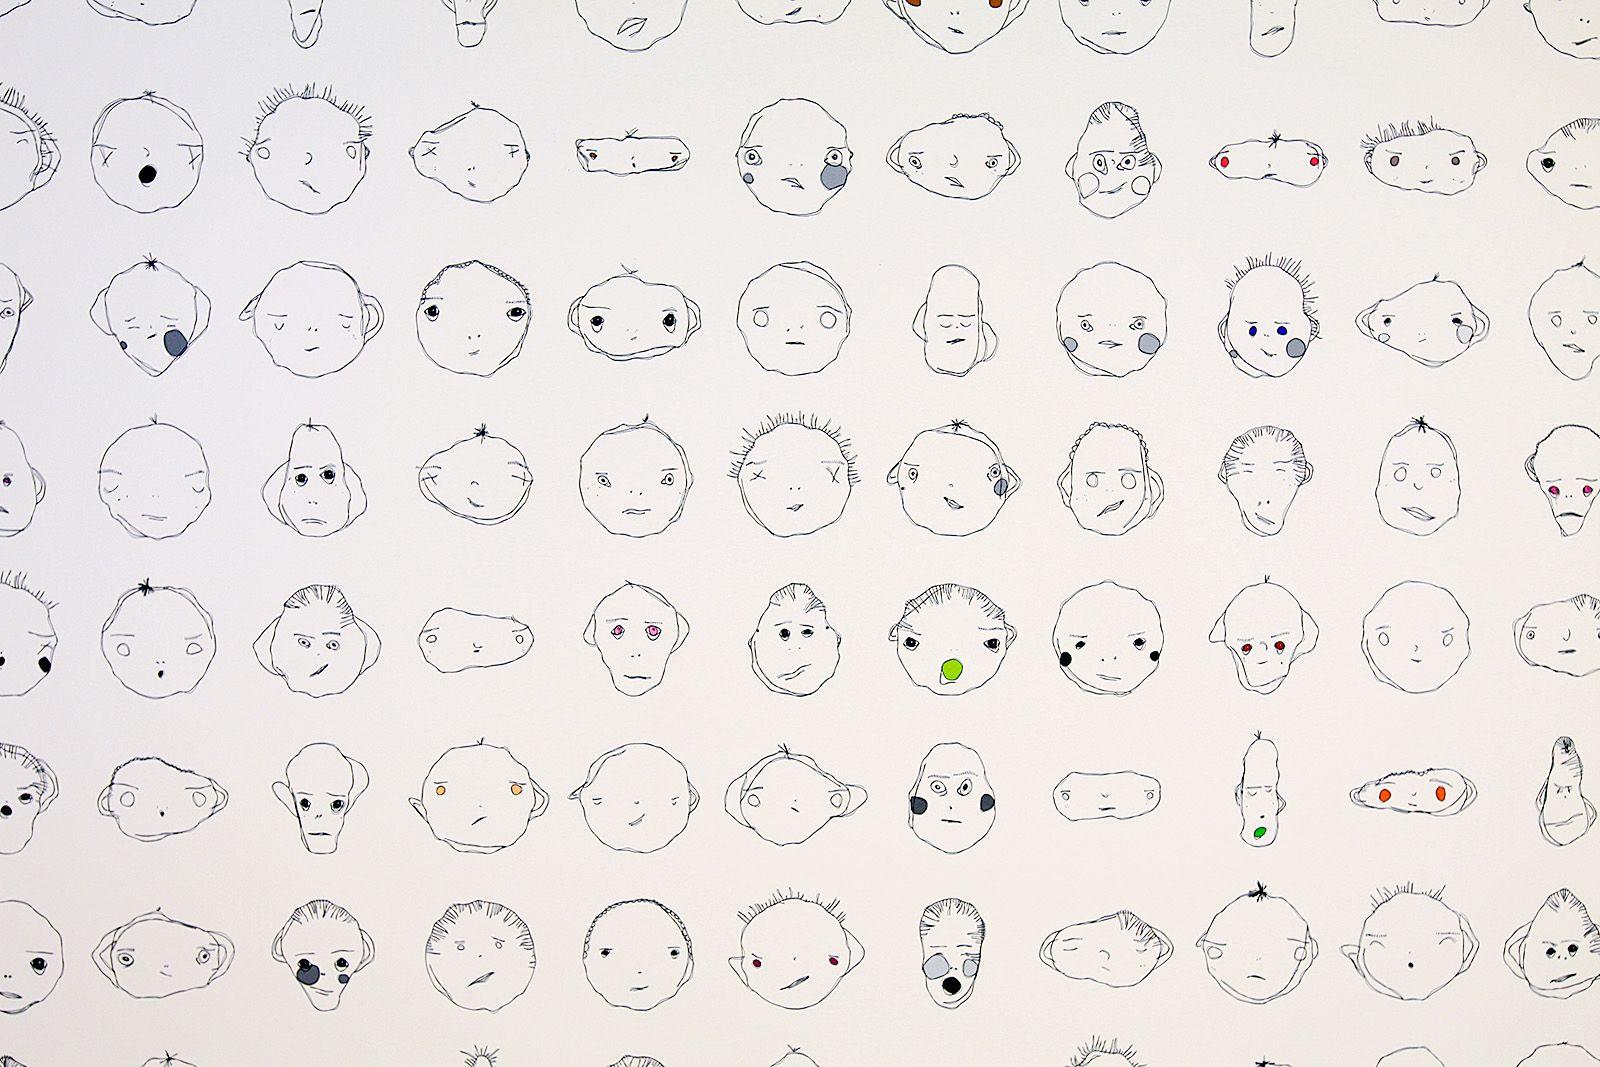 There are a variety of equally spaced apart weird faces. All of them have two eyes, two eyebrows, and a mouth. Some have hair, a nose, ears, or blush. All have unique expressions and are line drawn in black. Almost none have color.